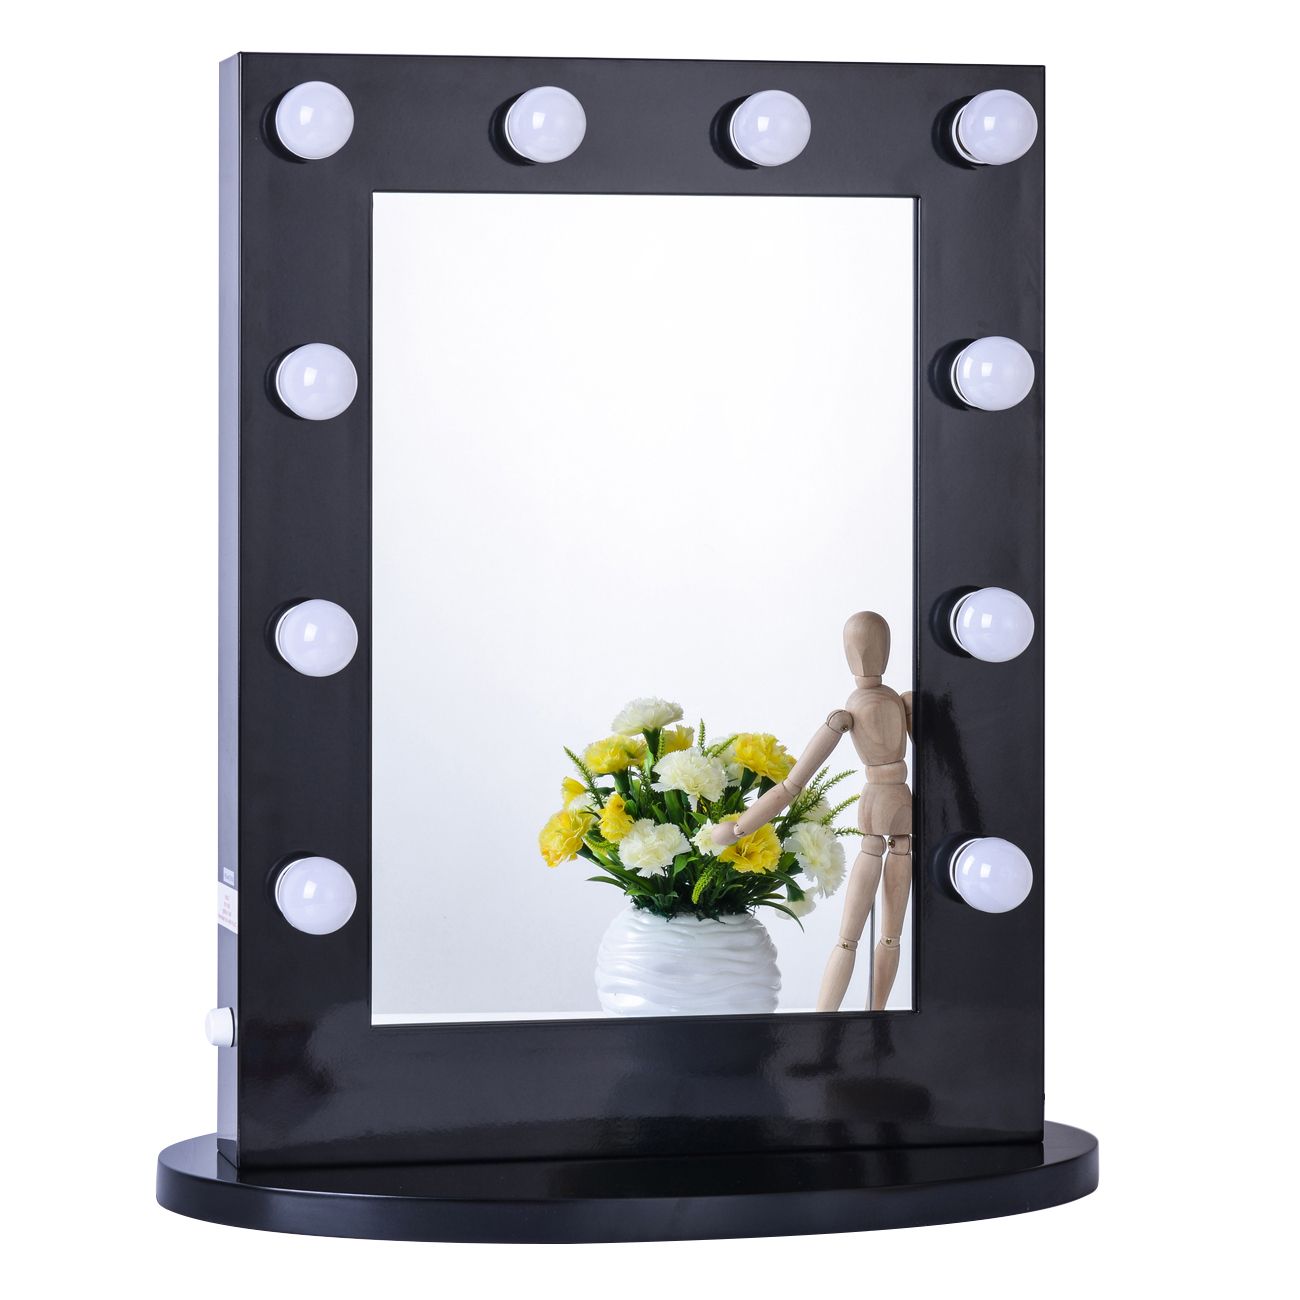 Led Lighted Makeup Mirrors Within Recent Chende Hollywood Tabletops Lighted Makeup Mirror Vanity Black With (View 6 of 15)